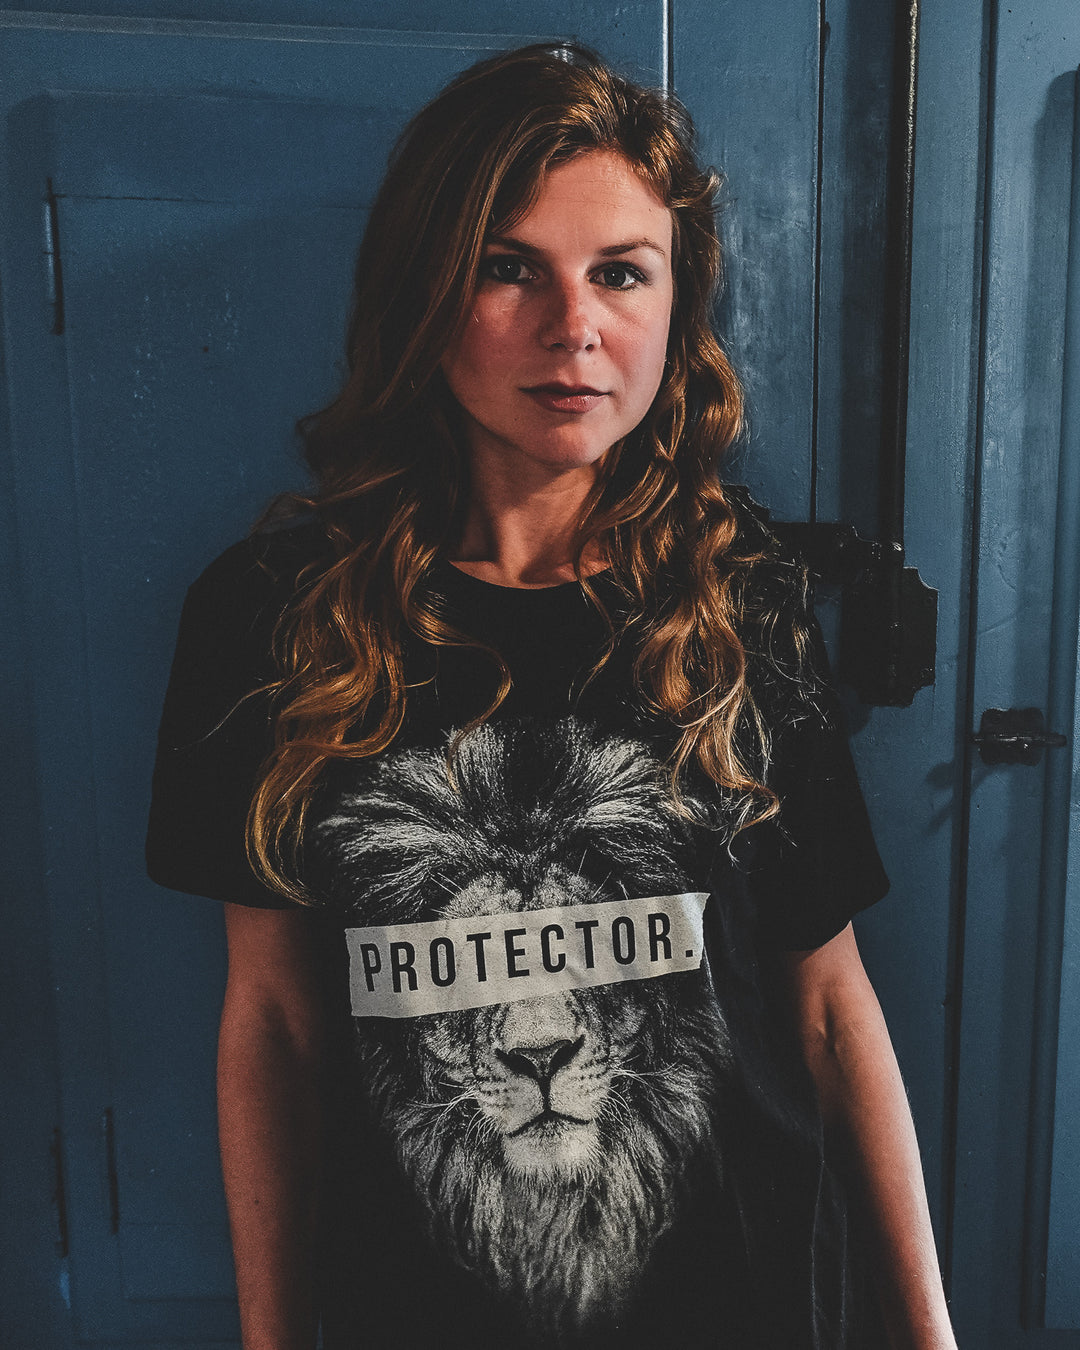 Protector Series Lion T-Shirt